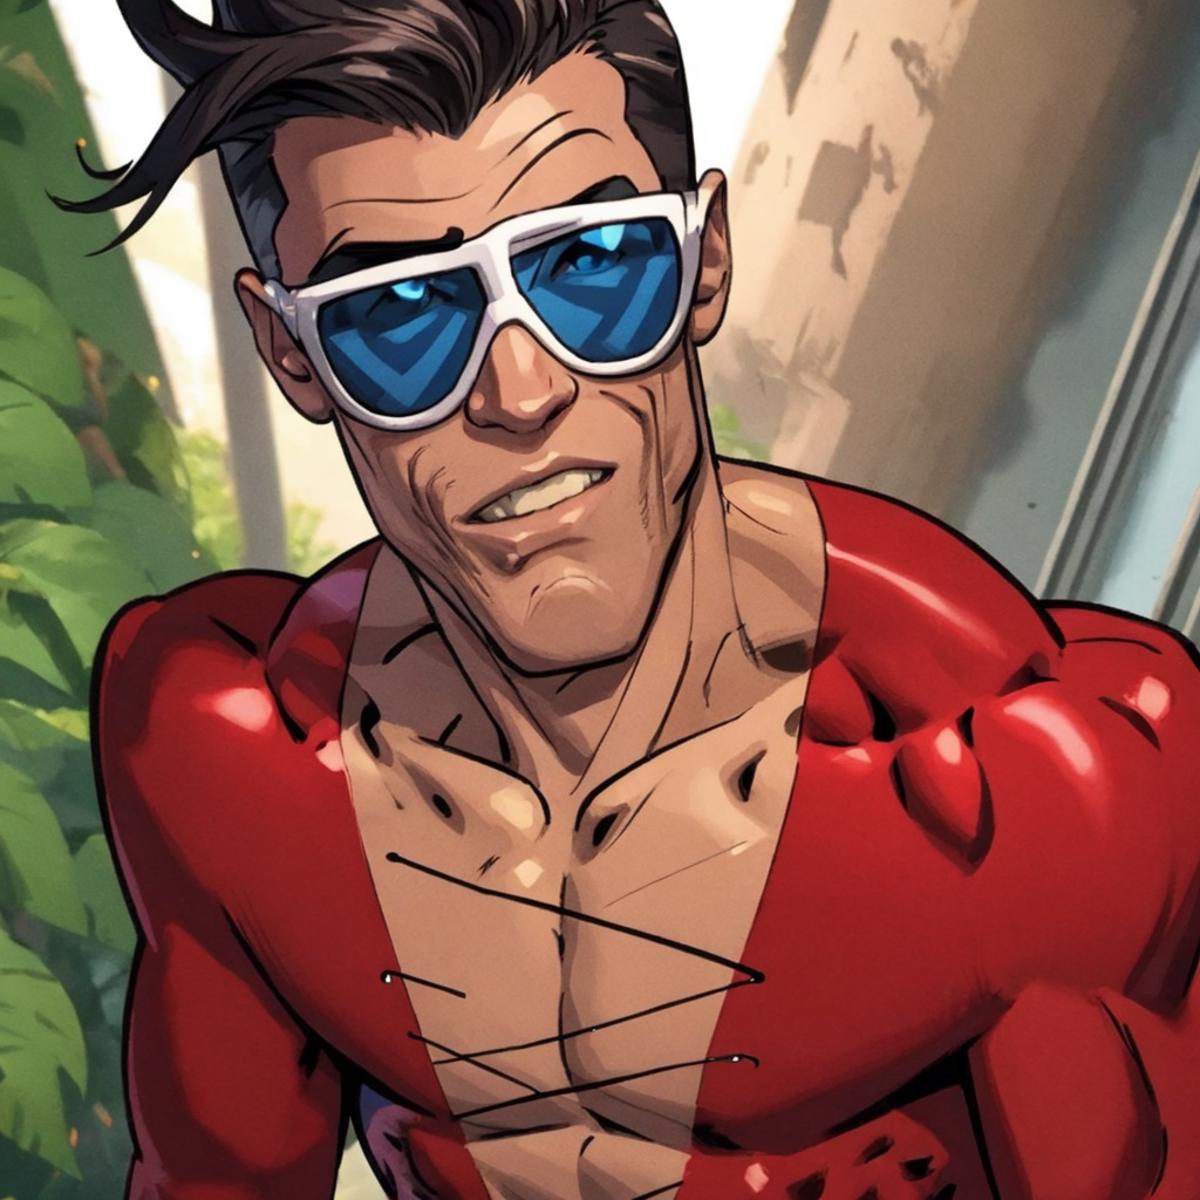 Plastic Man - DC image by MuscleEnjoyer